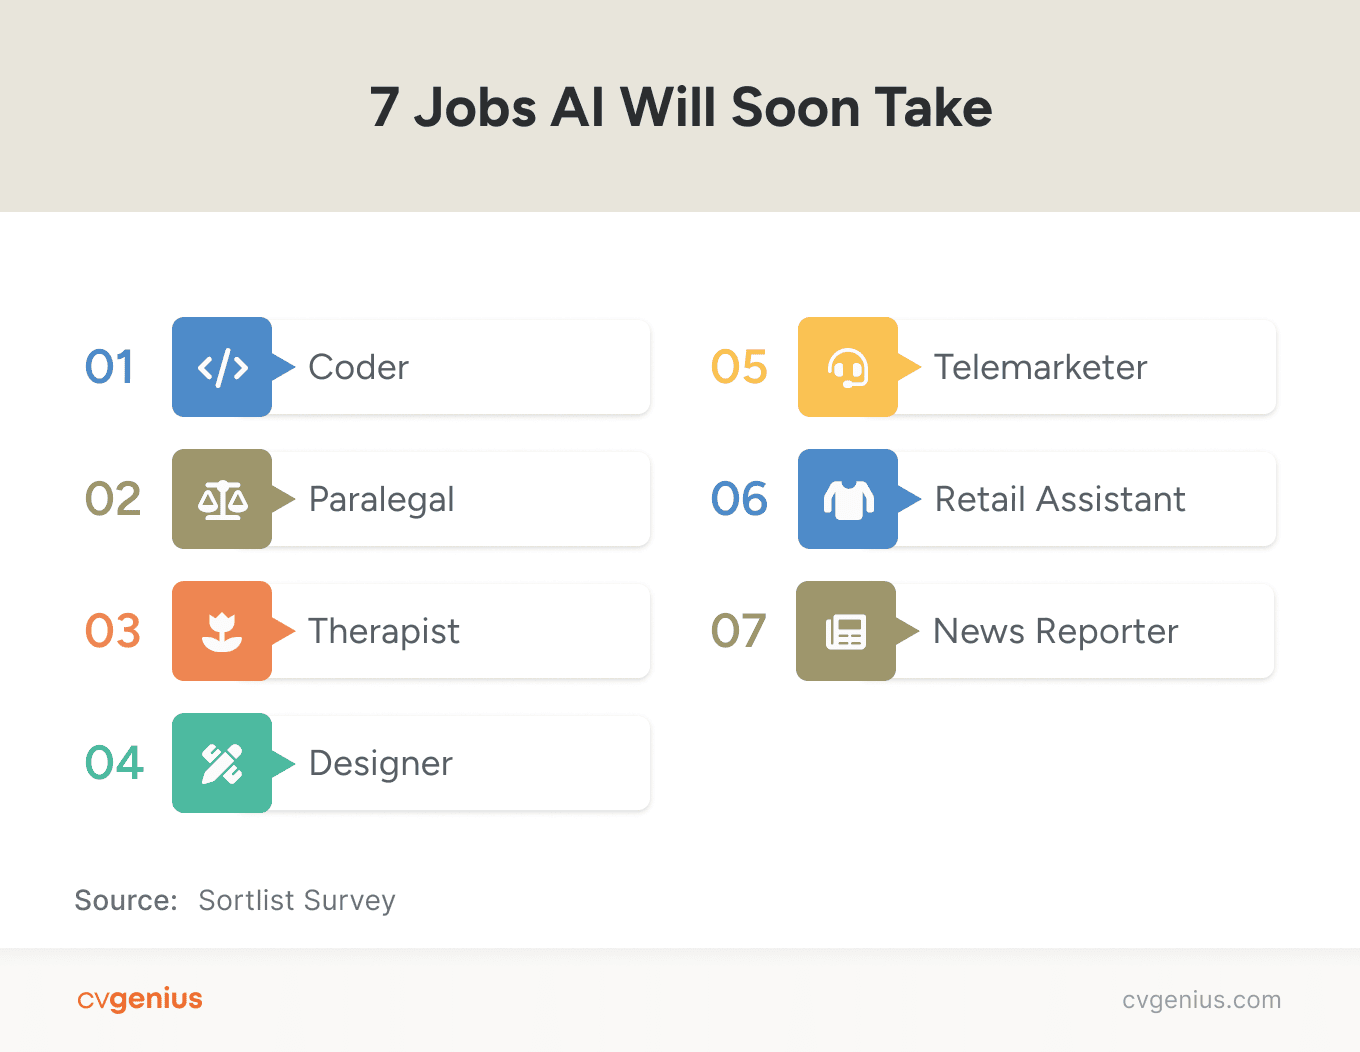 A robot on the right throws up a peace sign at a list of jobs AI will replace.